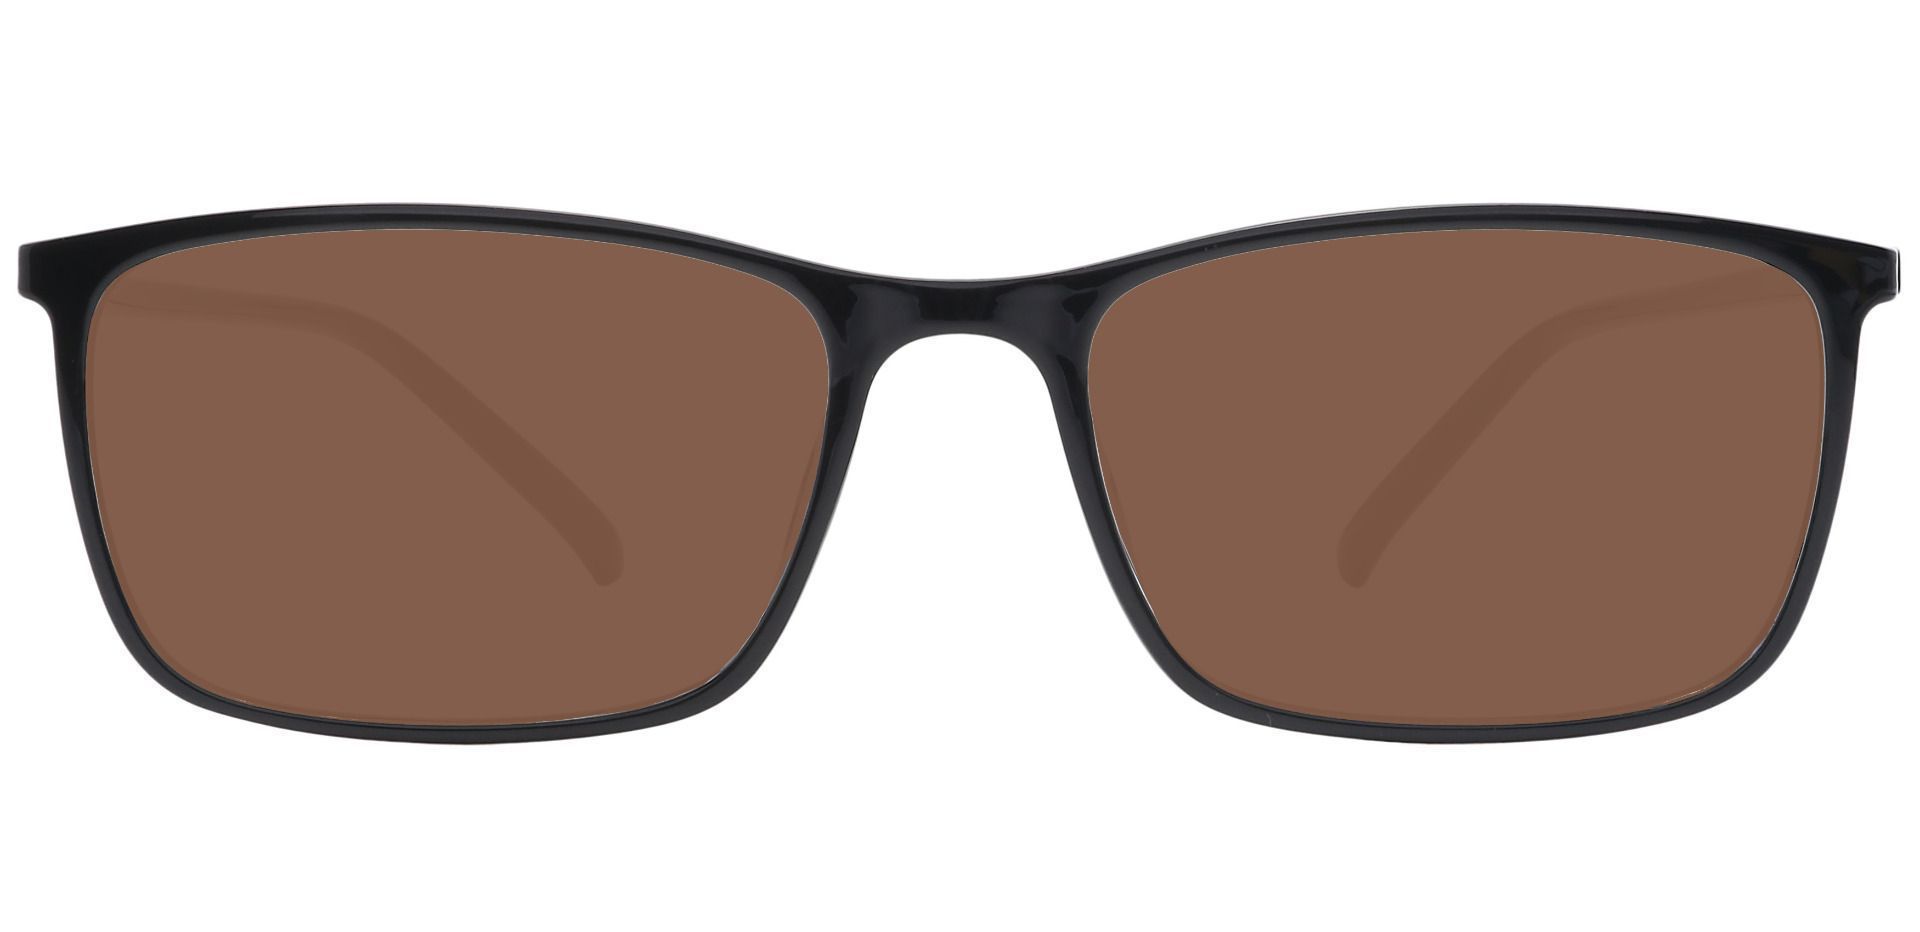 Fuji Rectangle Reading Sunglasses - Black Frame With Brown Lenses